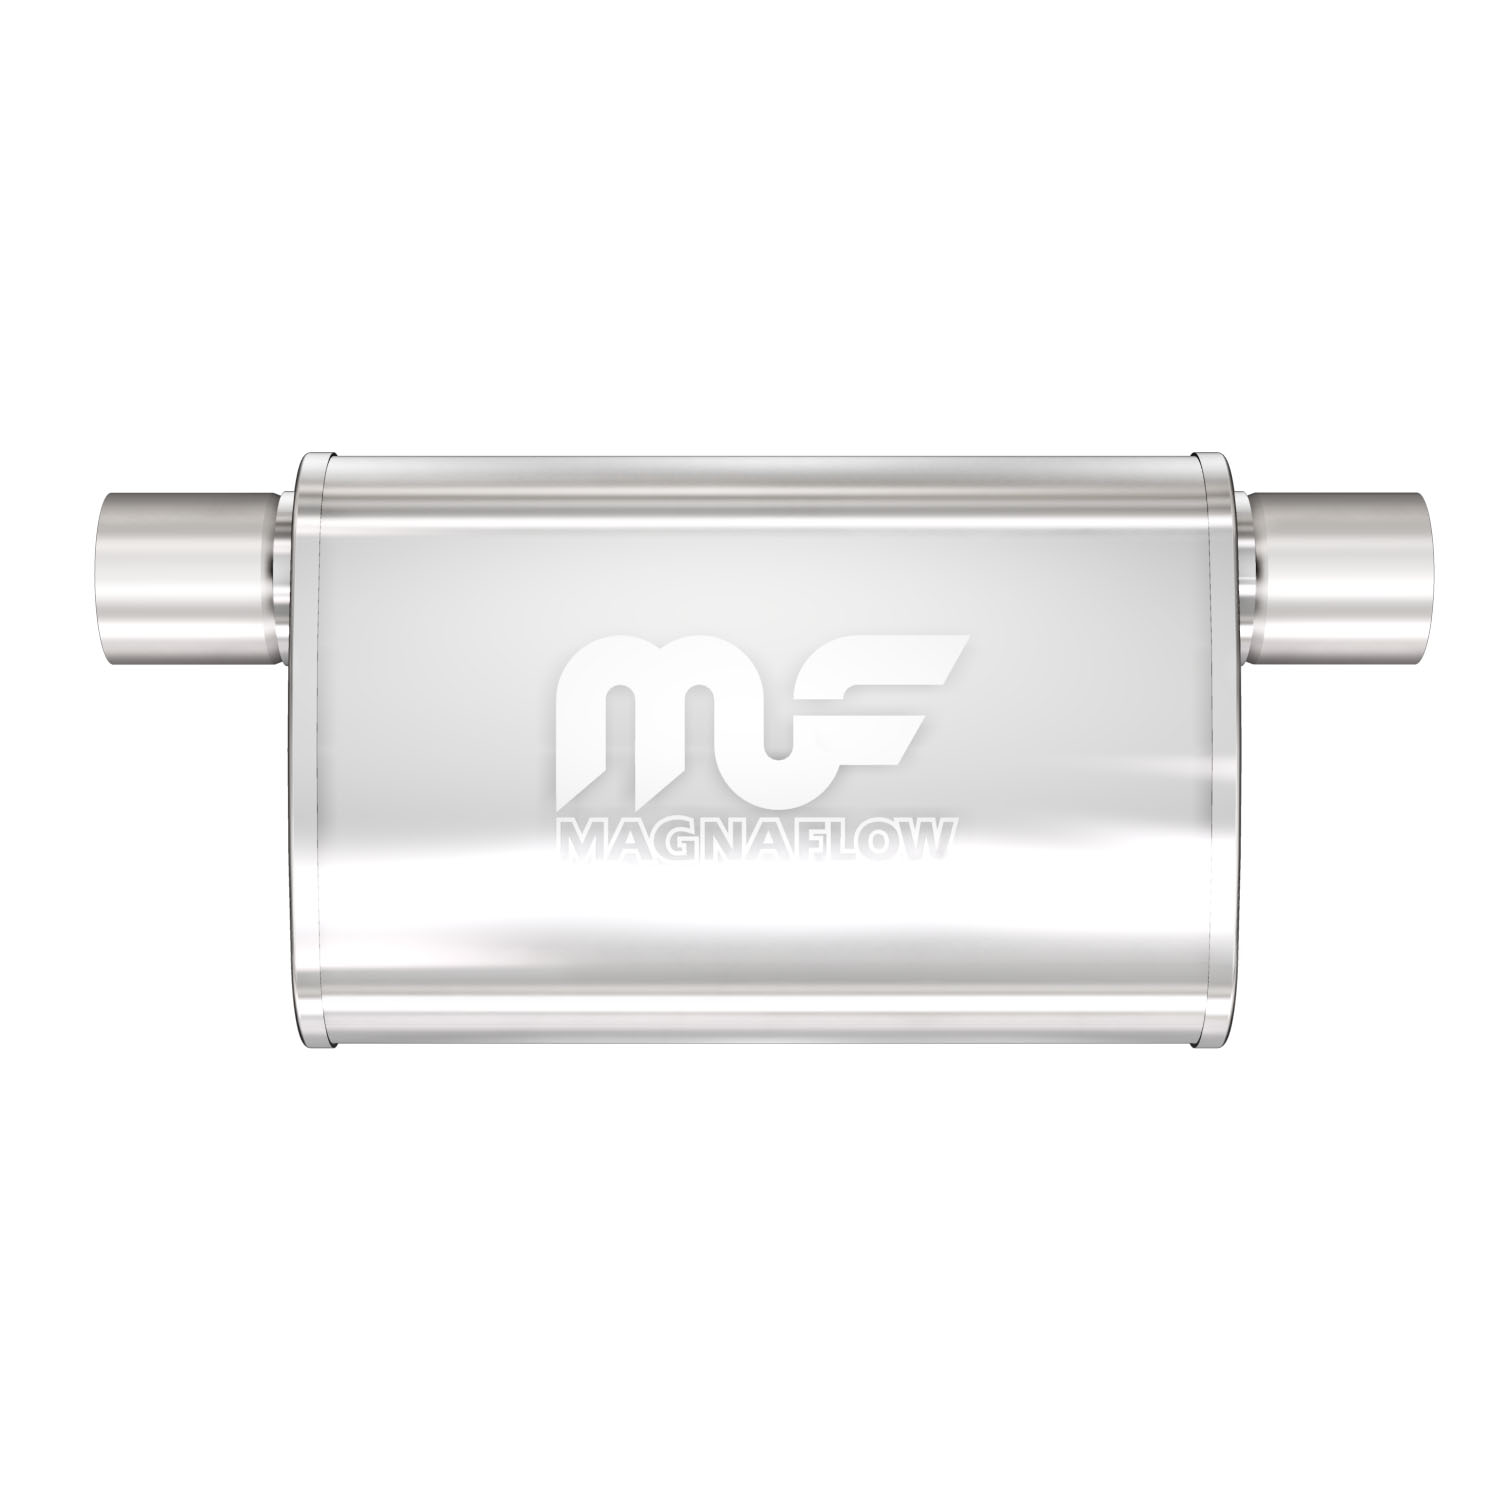 4" x 9" Oval Muffler Offset In/Offset Out: 2.5" Body Length: 11" Overall Length: 17" Core Size: 2.5" Polished Finish